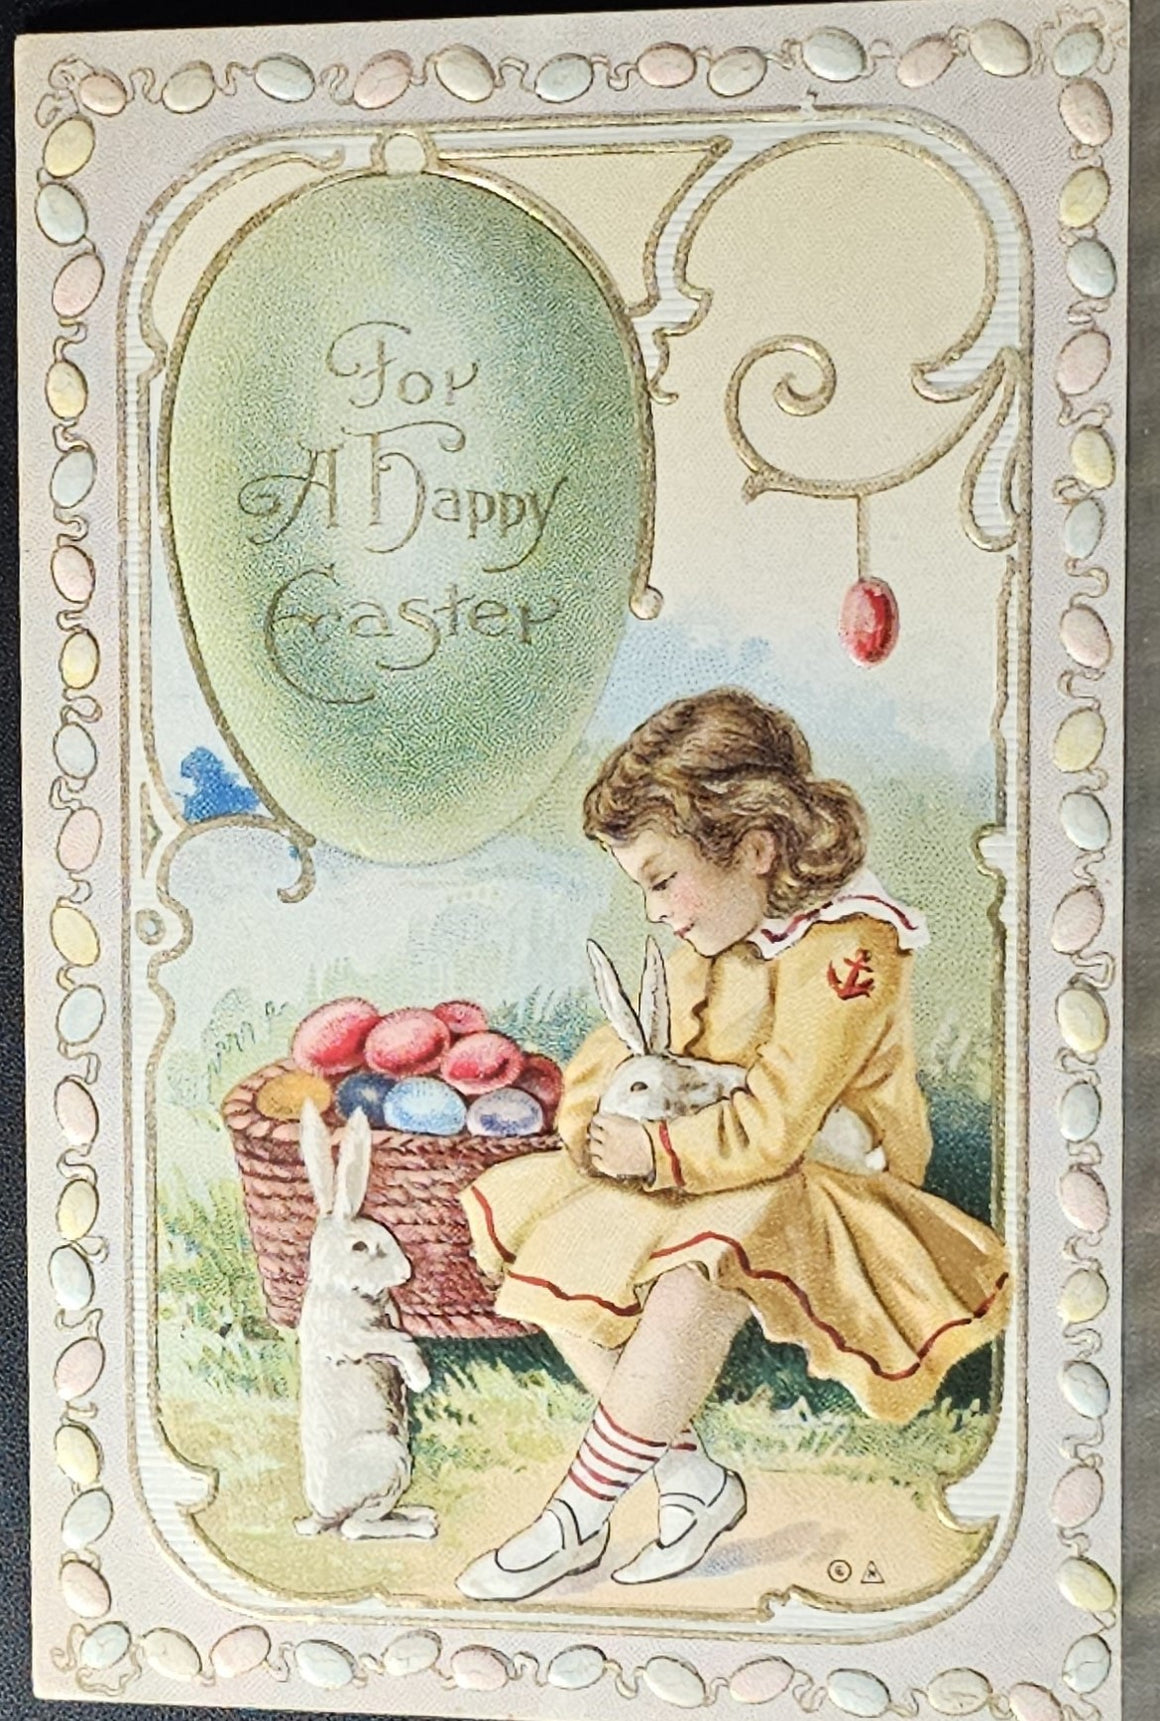 Easter Postcard Young Boy with White Bunny Rabbits and Painted Eggs Giant Green Egg Gold Highlights Egg Border